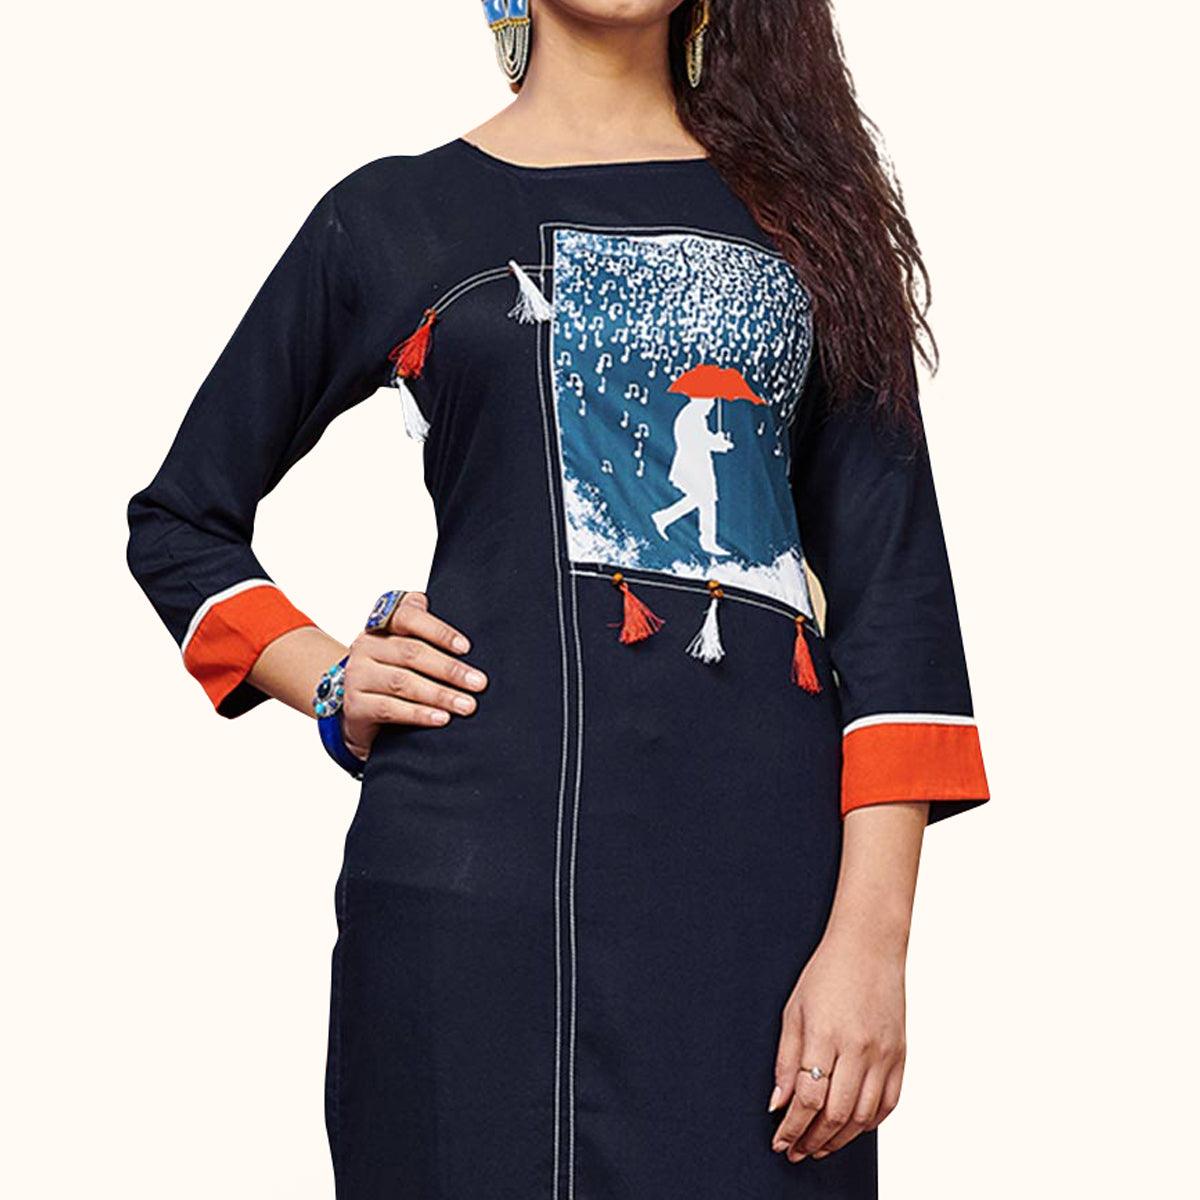 Appealing Navy Blue Colored Party Wear Printed Rayon Kurti - Peachmode